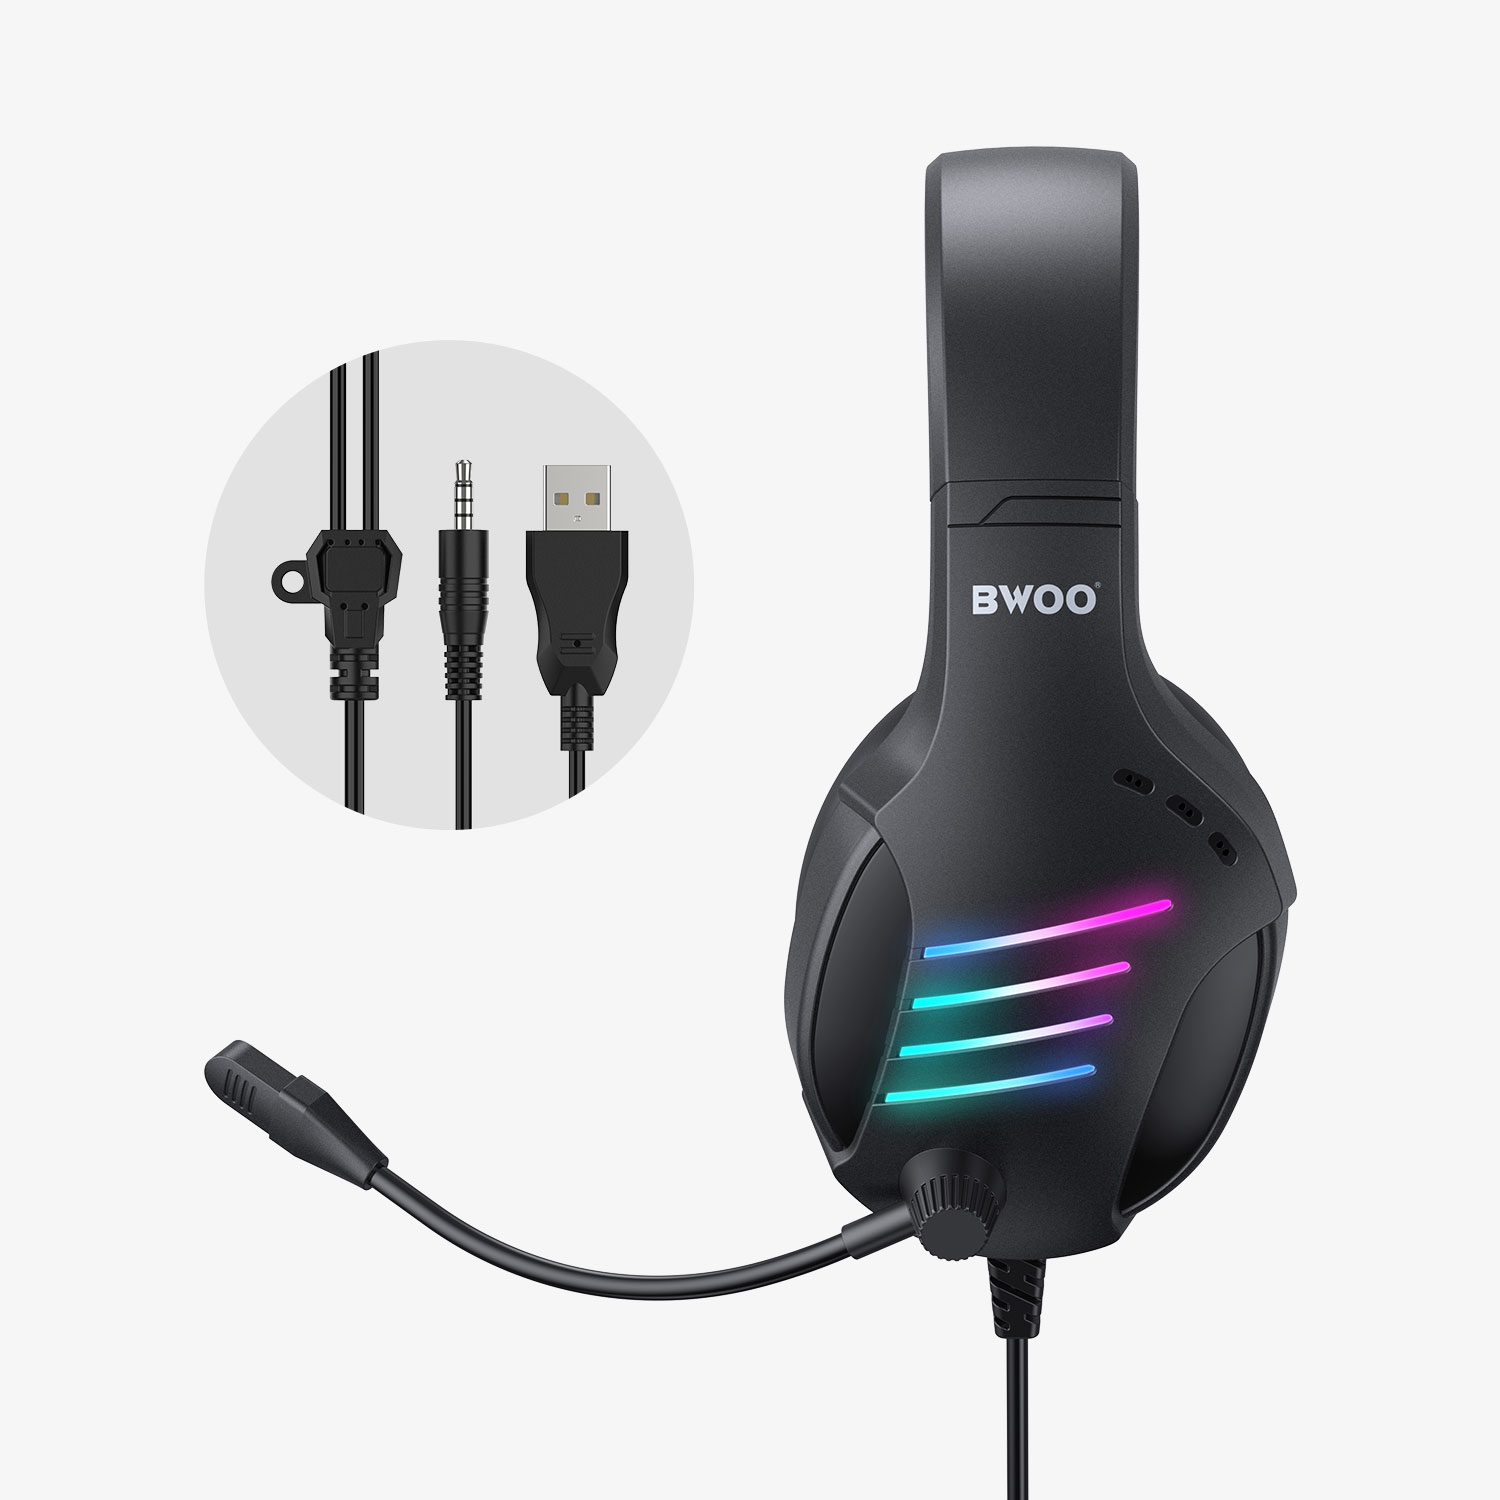 Wired gaming headphone with mic